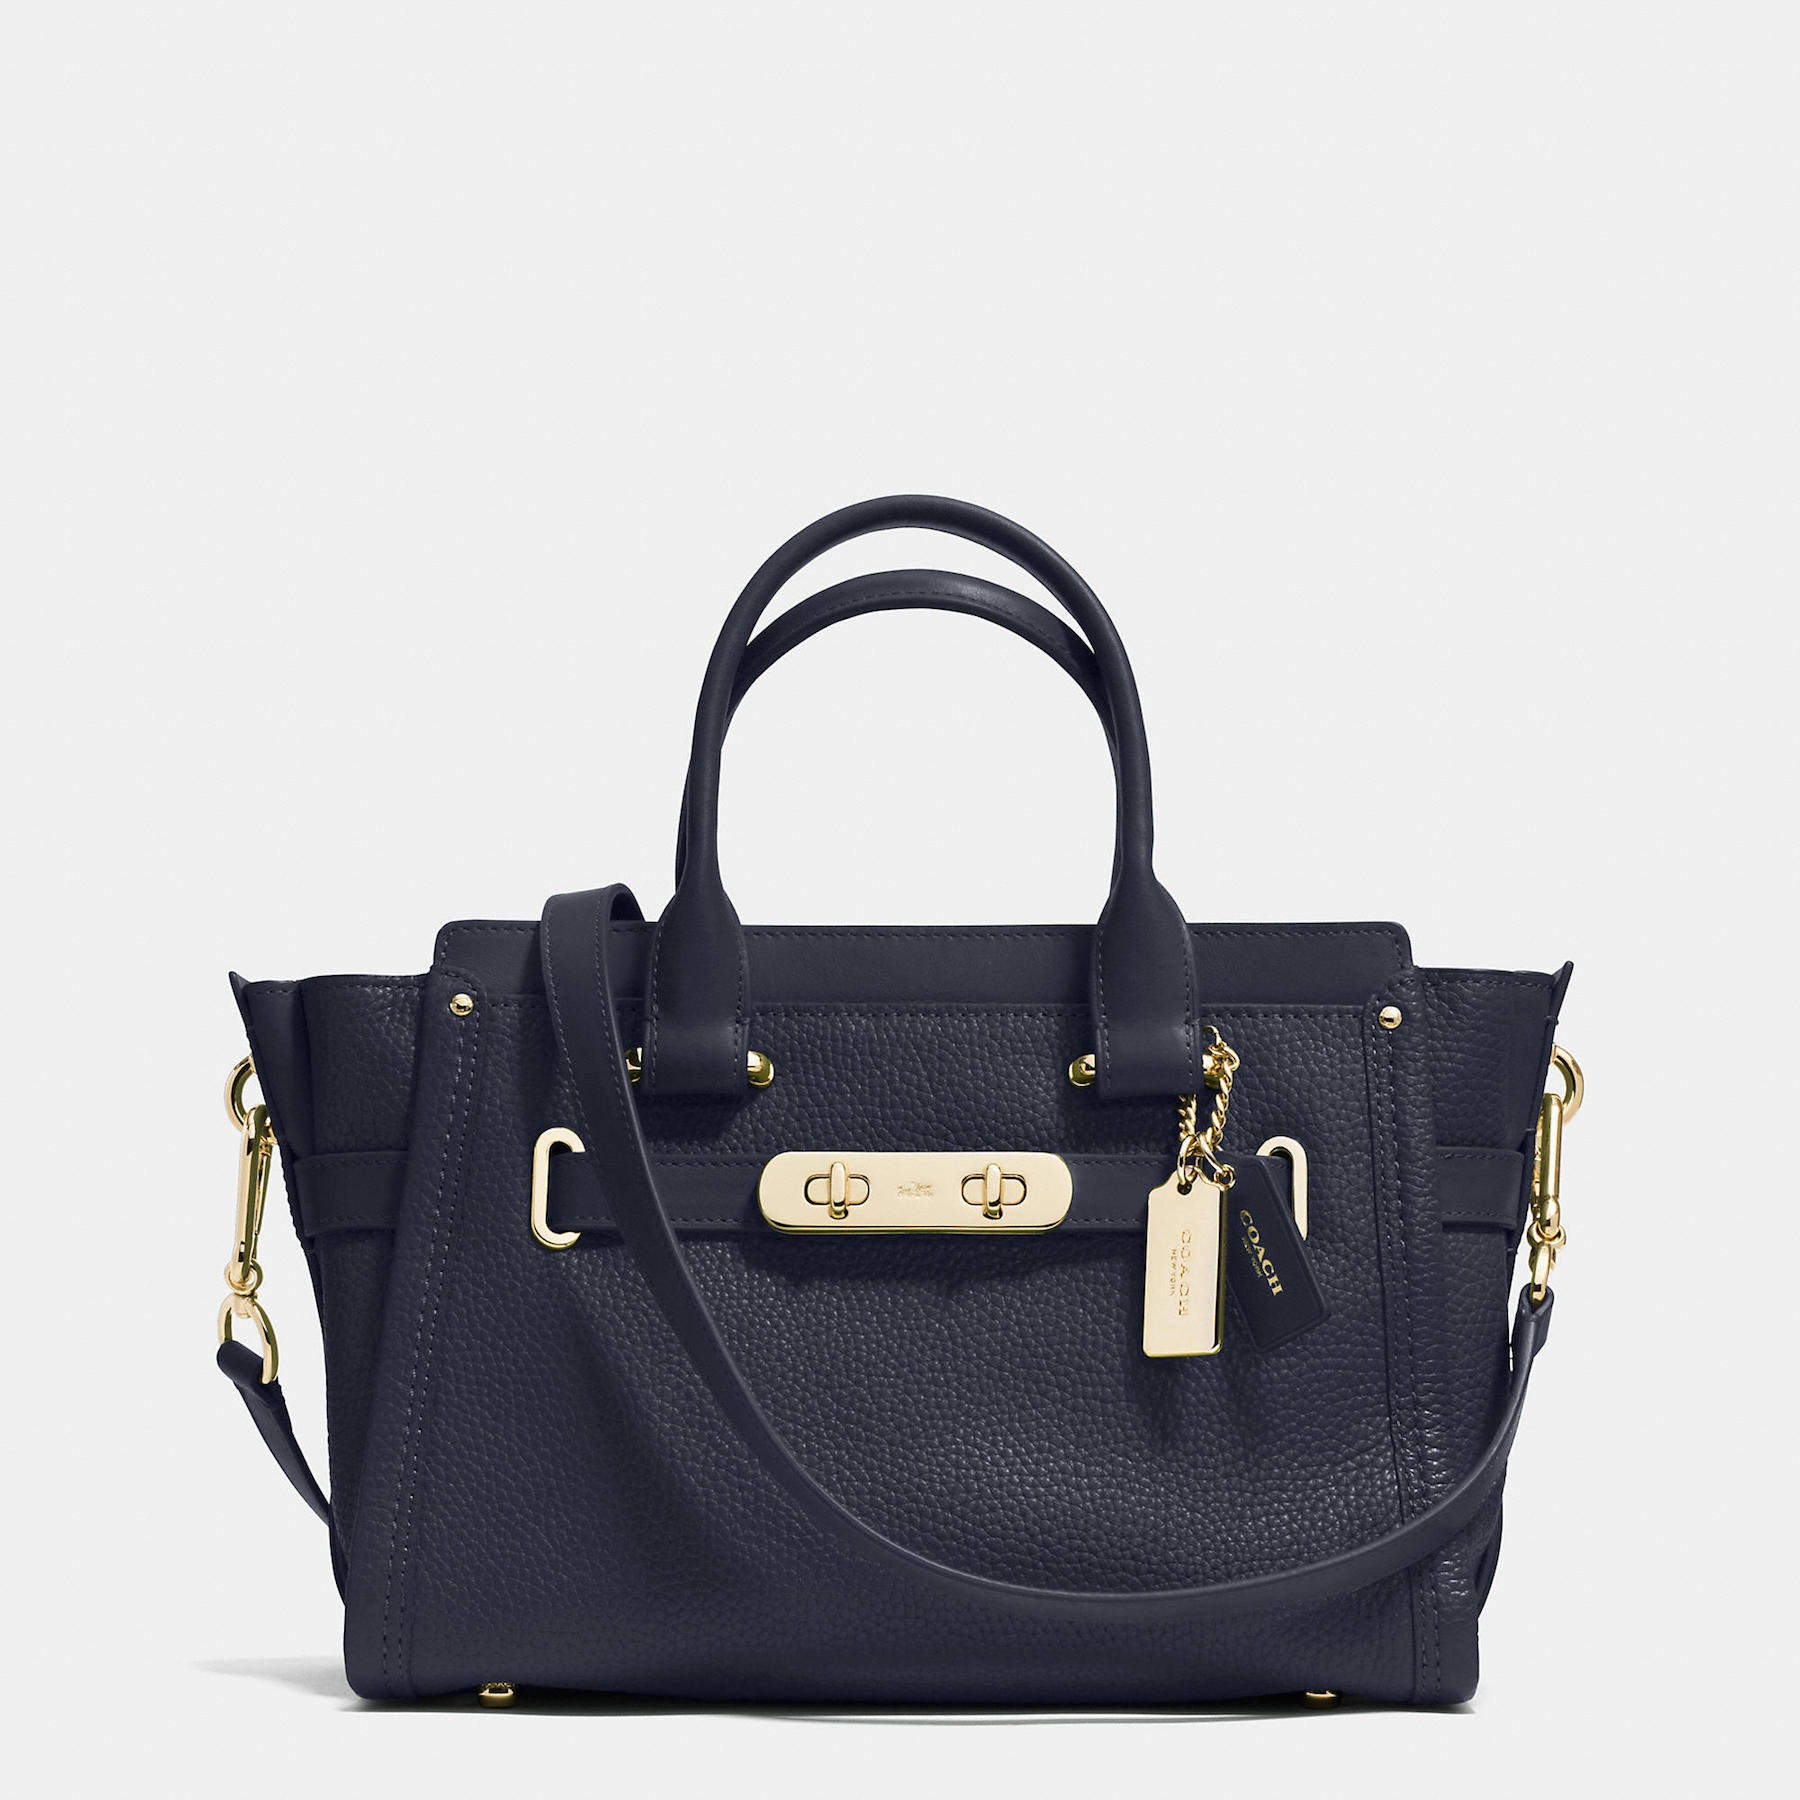 Coach Swagger 27 In Pebble Leather with navy and light gold